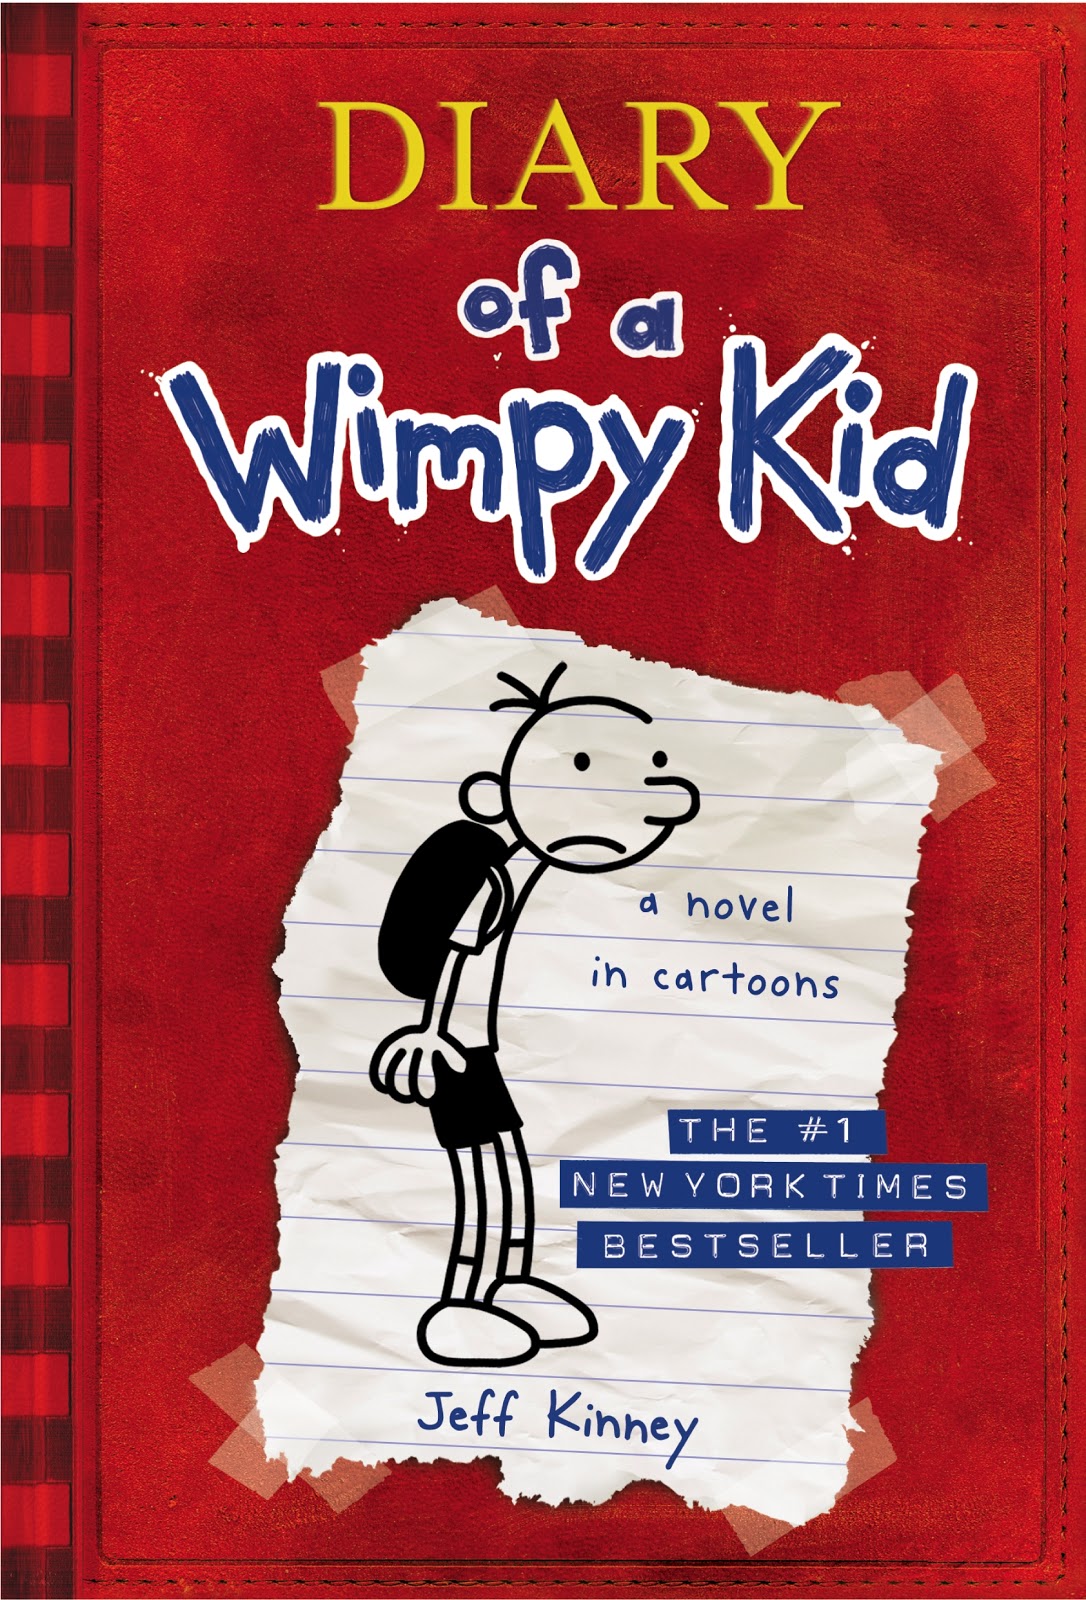 What is the answers for the quiz for diary of a Wimpy kid no